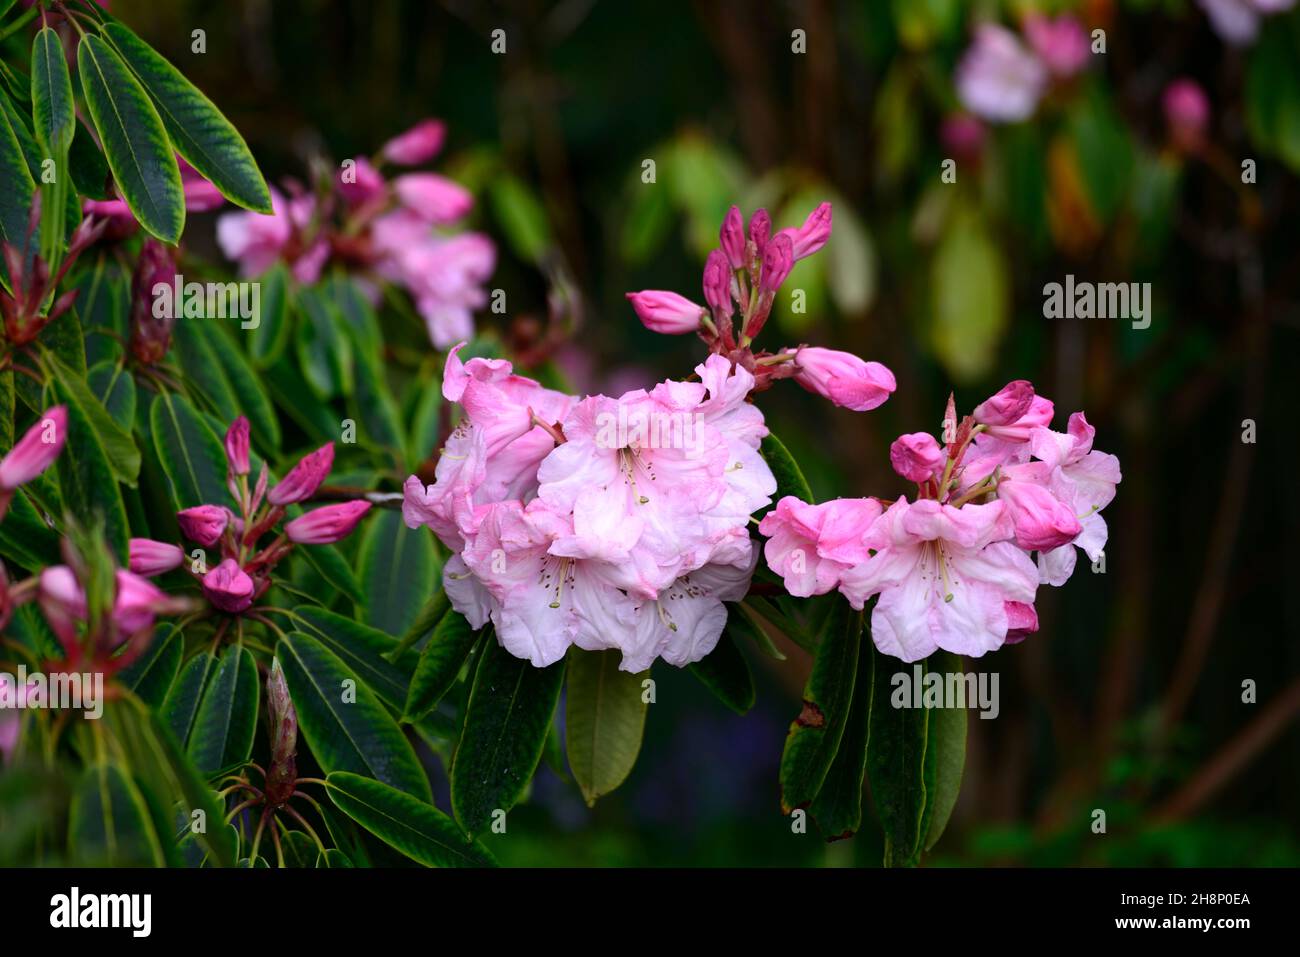 Rhododendron smirnowii,Smirnow Rhododendron,purple rose red flowers,flower,flowering,thick leathery dark green leaves,foliage,rhododendrons,woodland g Stock Photo